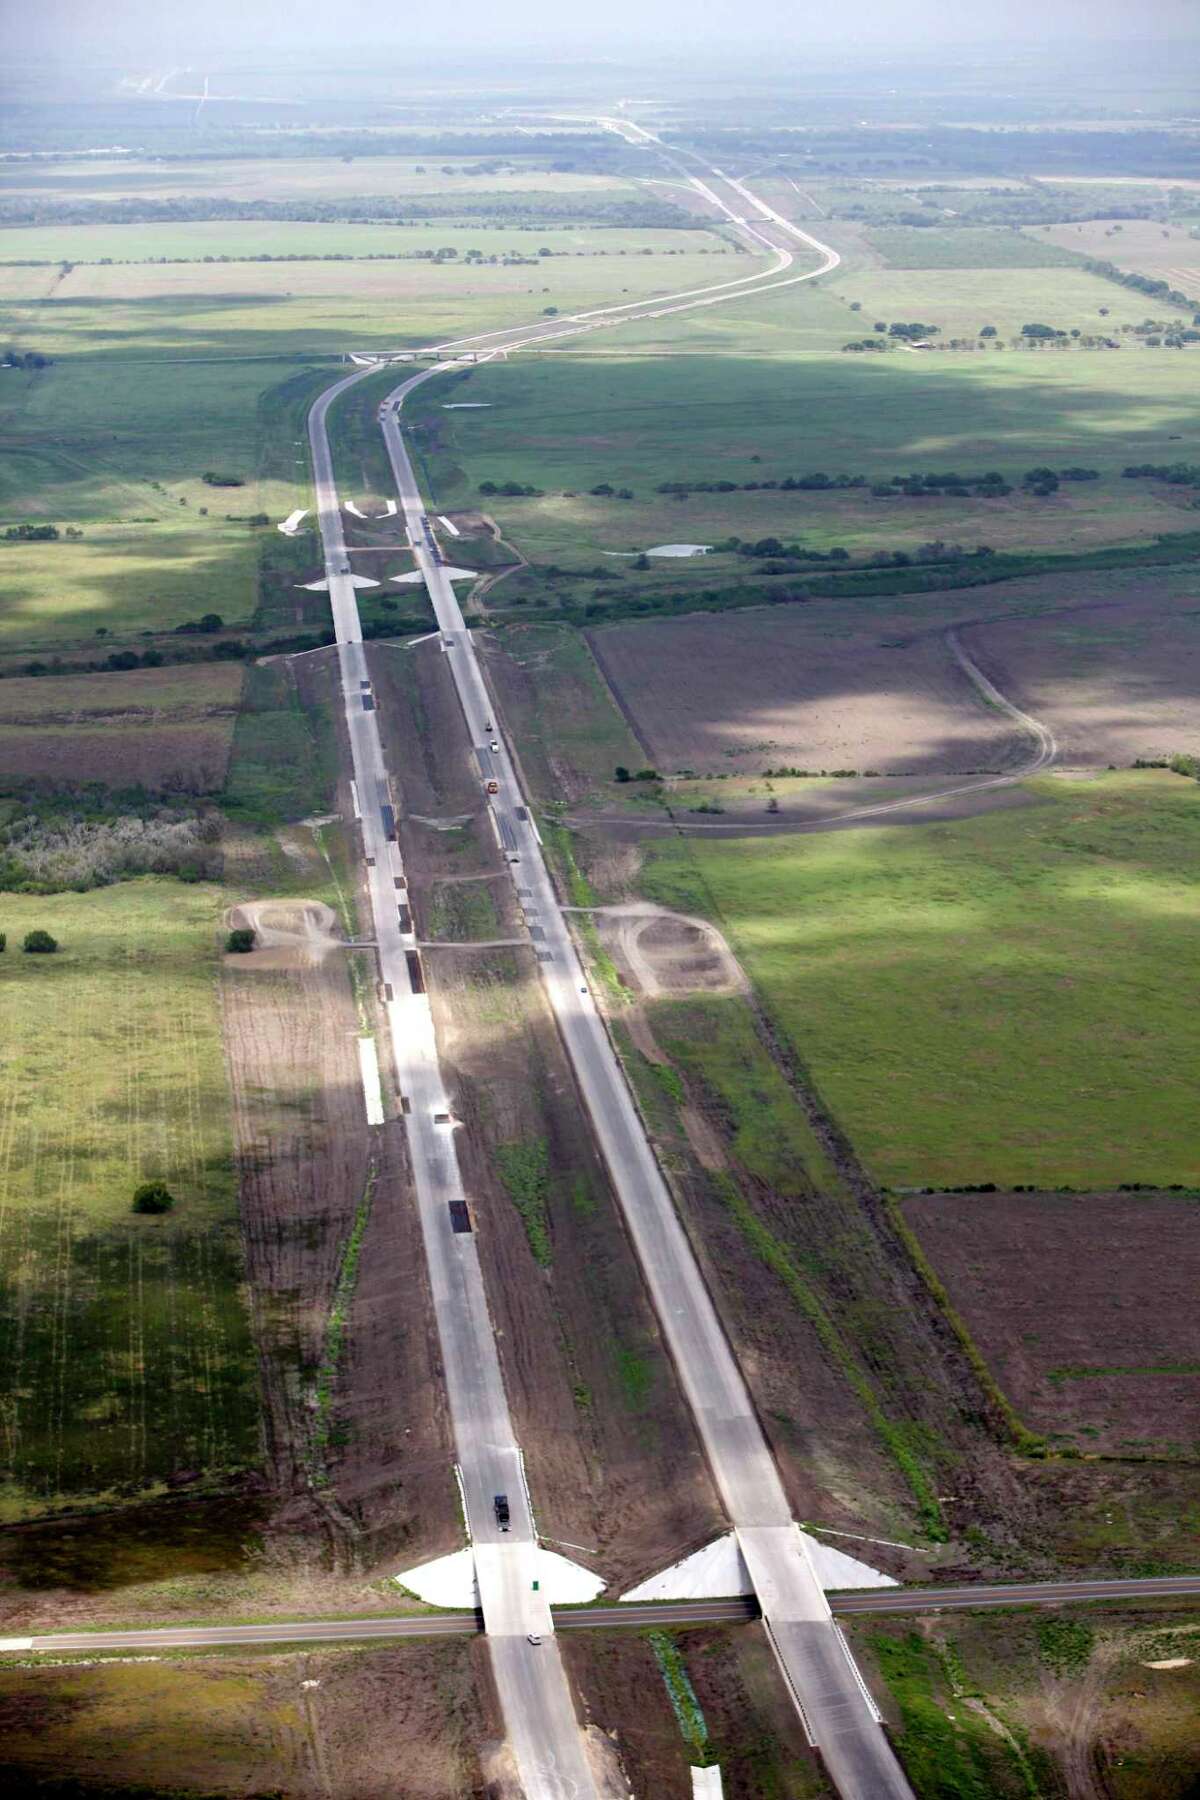 Not all public-private partnerships work well for infrastructure projects. Take the Texas 130 toll road that bypasses Interstate 35 between Austin and San Antonio, seen here still under construction in 2012. Toll revenues did not meet expectations.